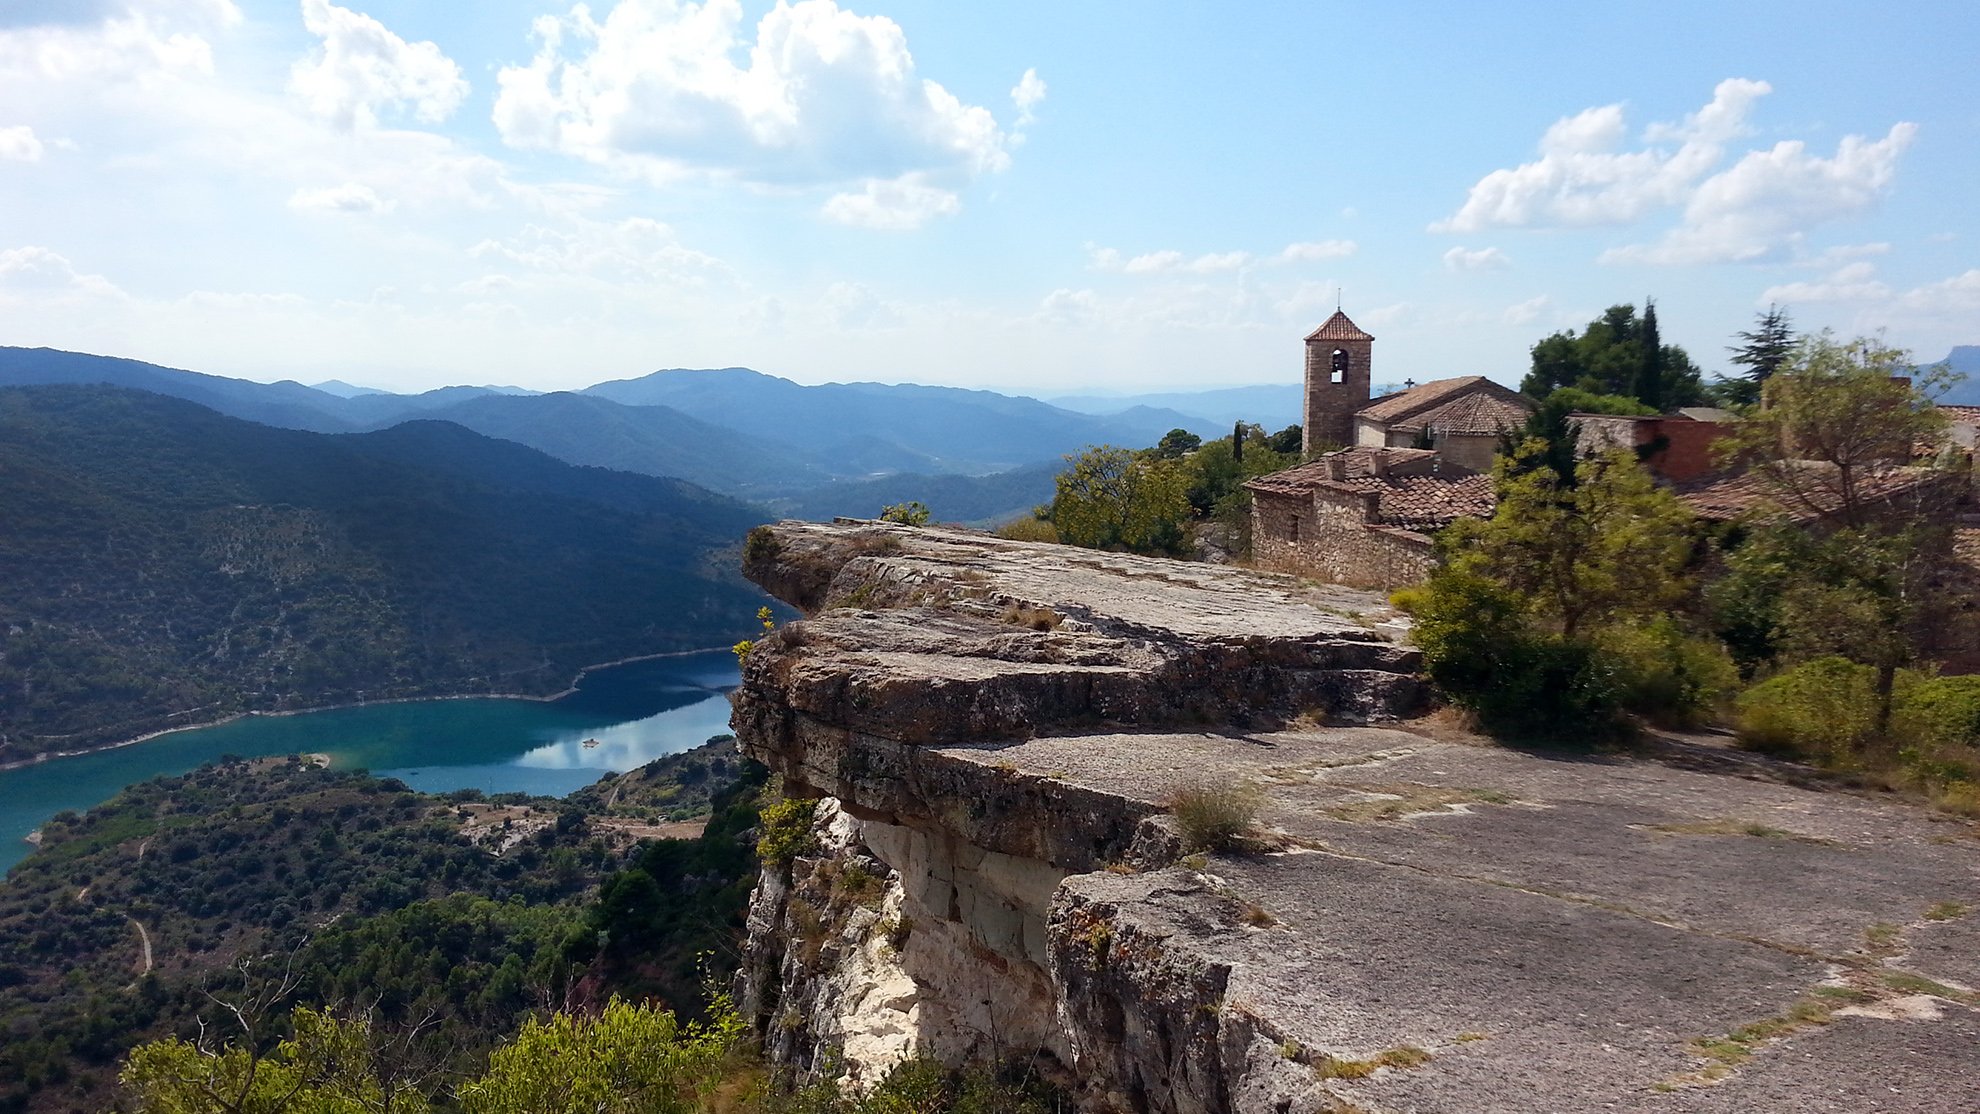 Siurana with a spectacular view